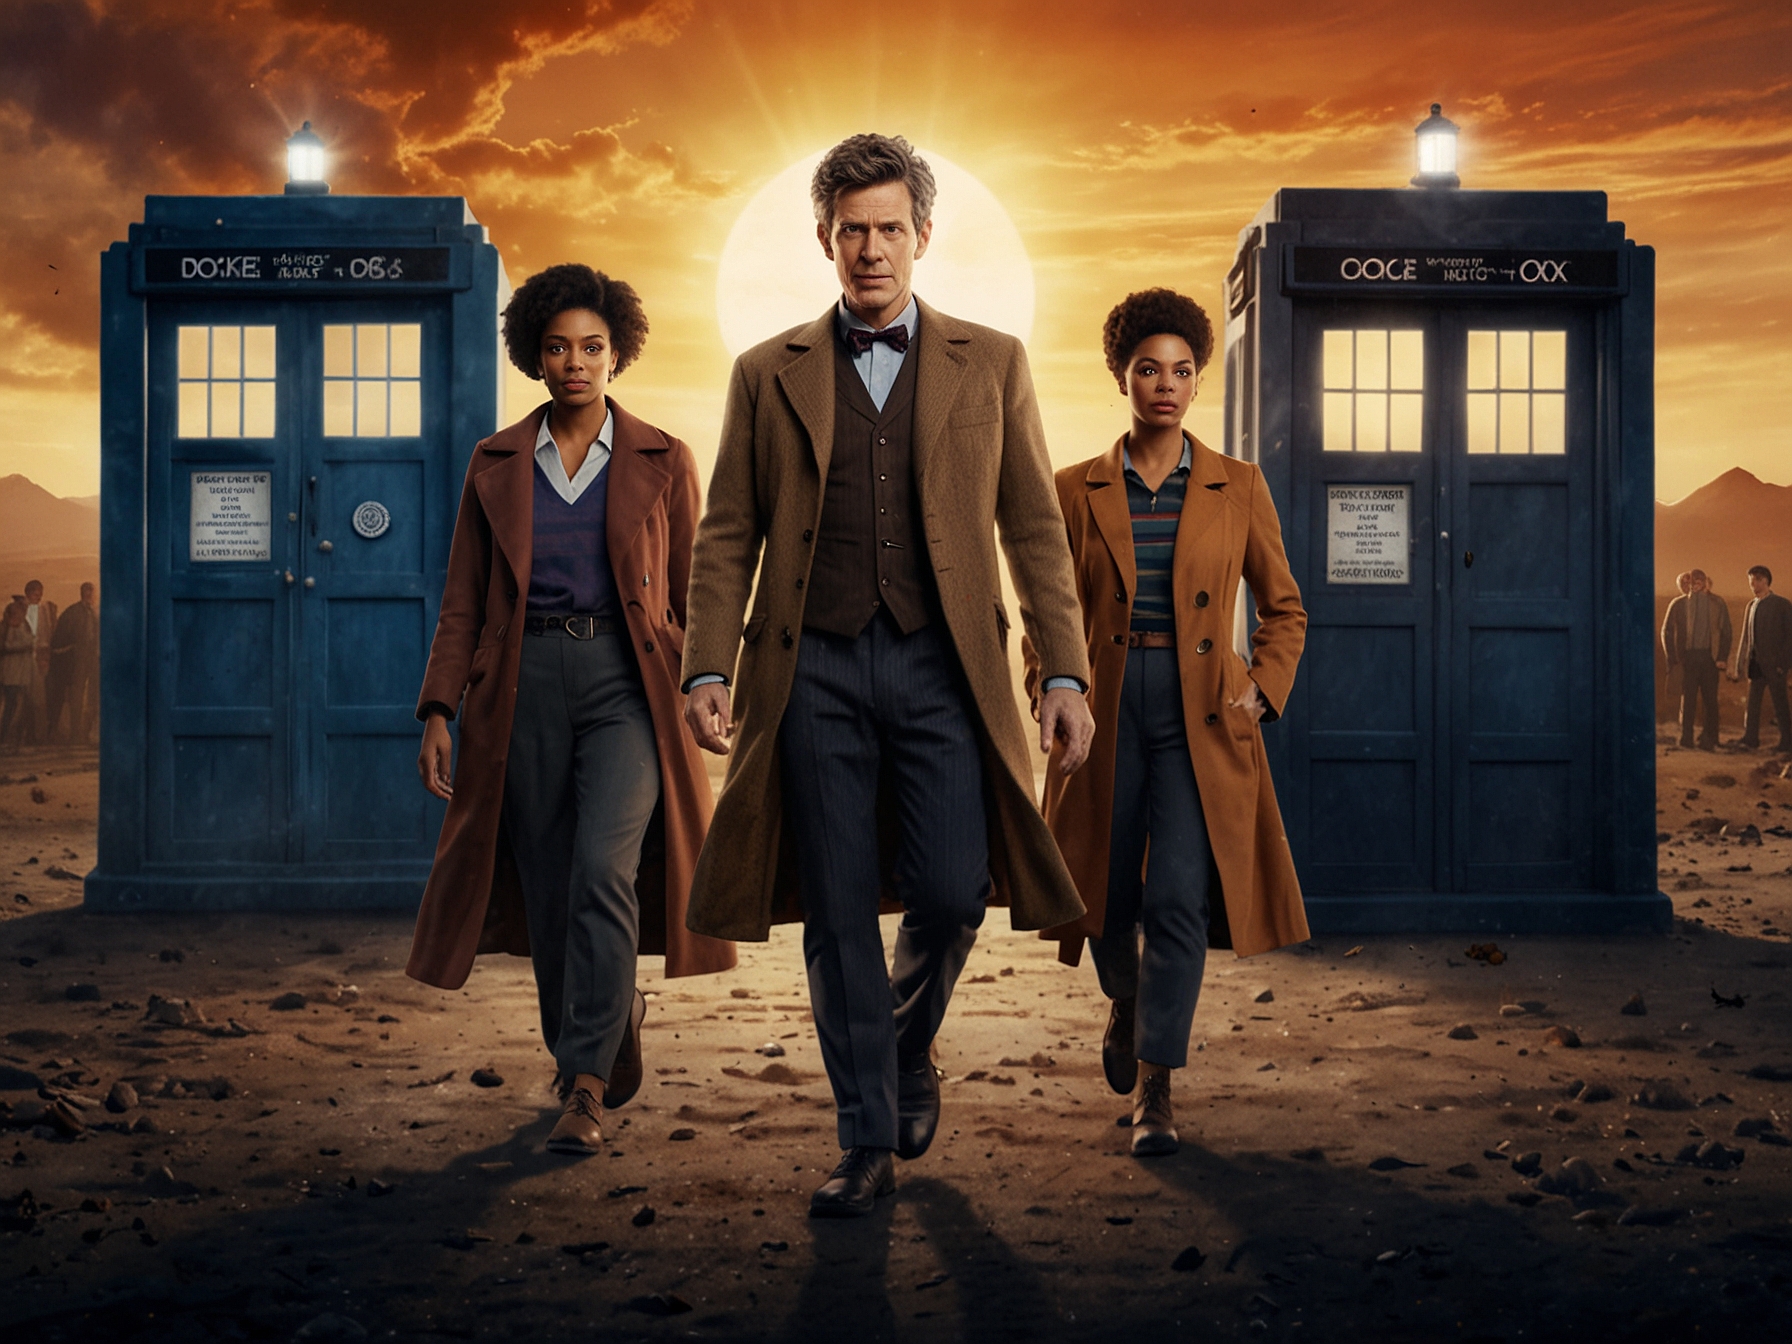 The Doctor alongside their new companions, who bring unique backgrounds and dynamics to the show. This season promises a blend of classic elements and new storylines that excite Whovians.